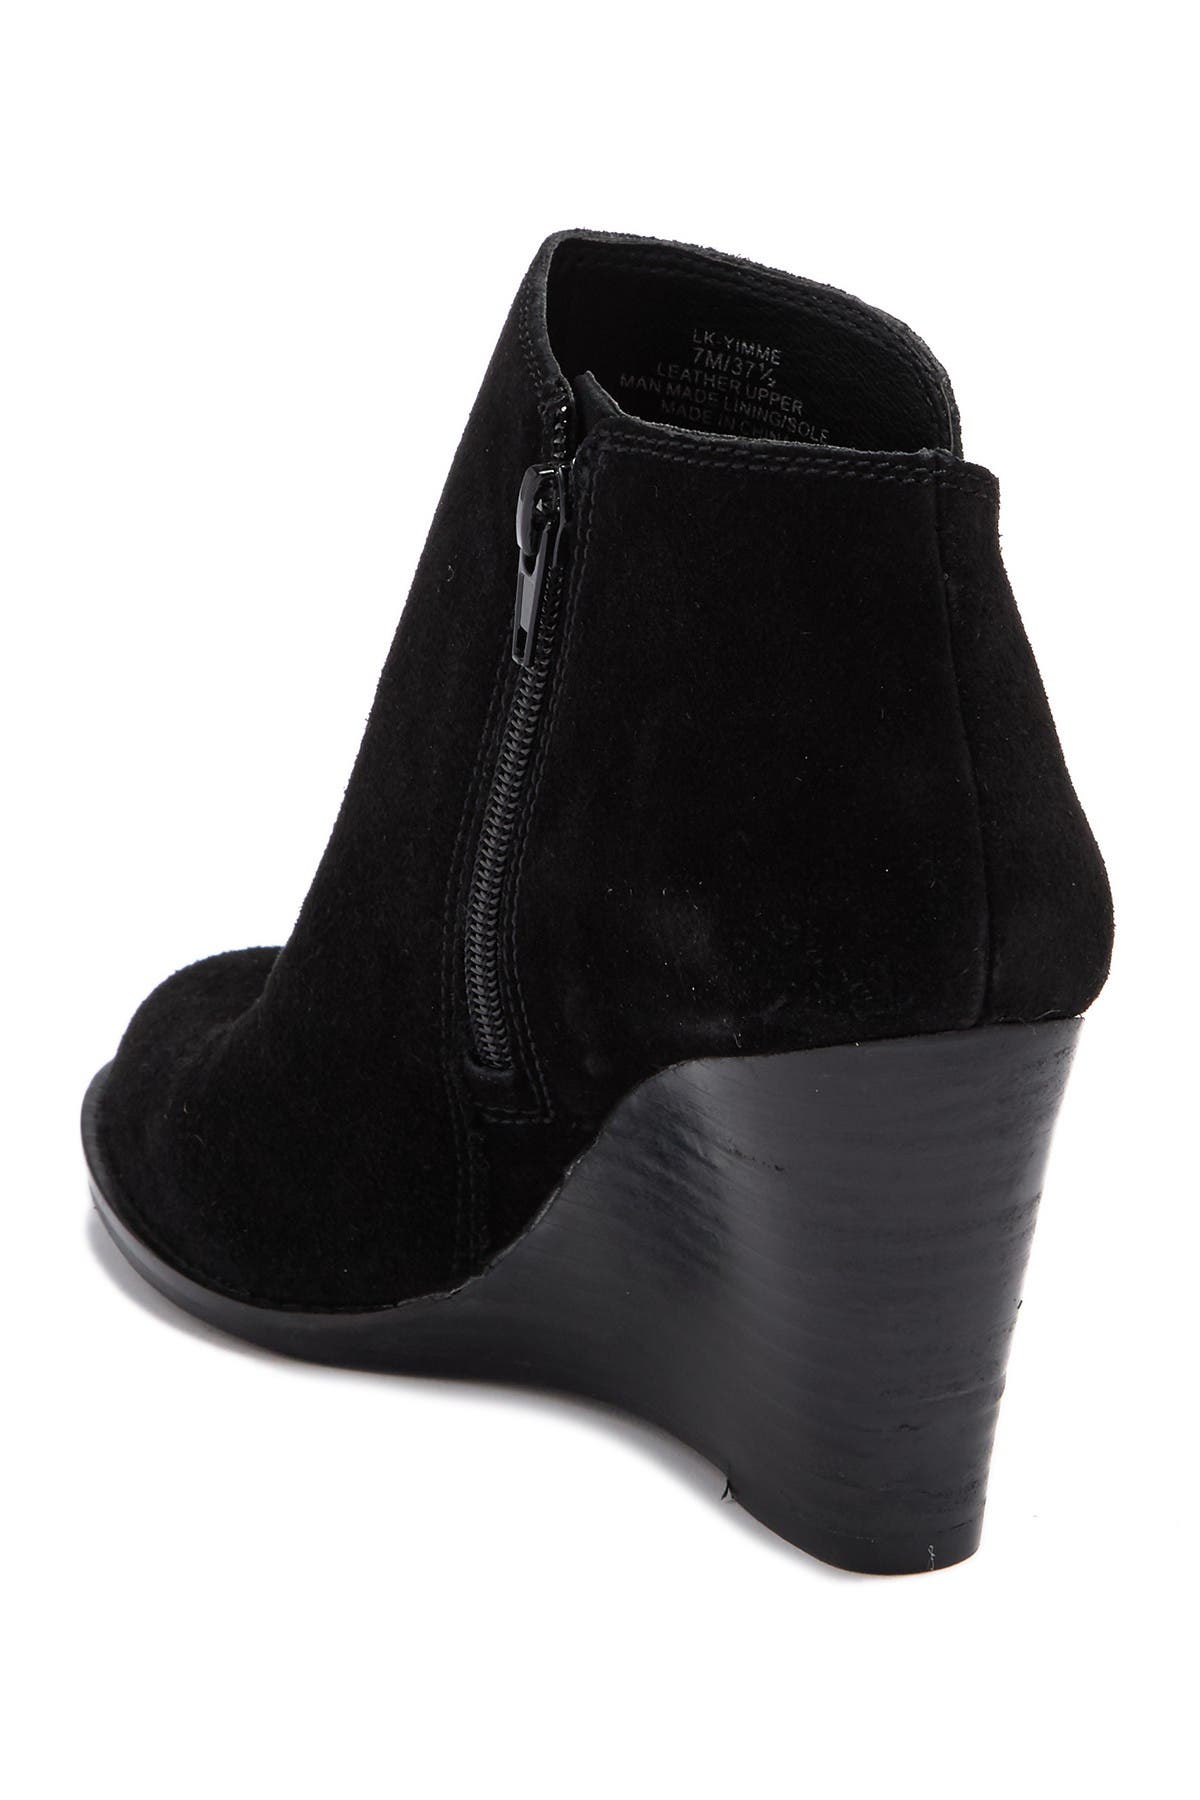 lucky brand yimmie wedge bootie